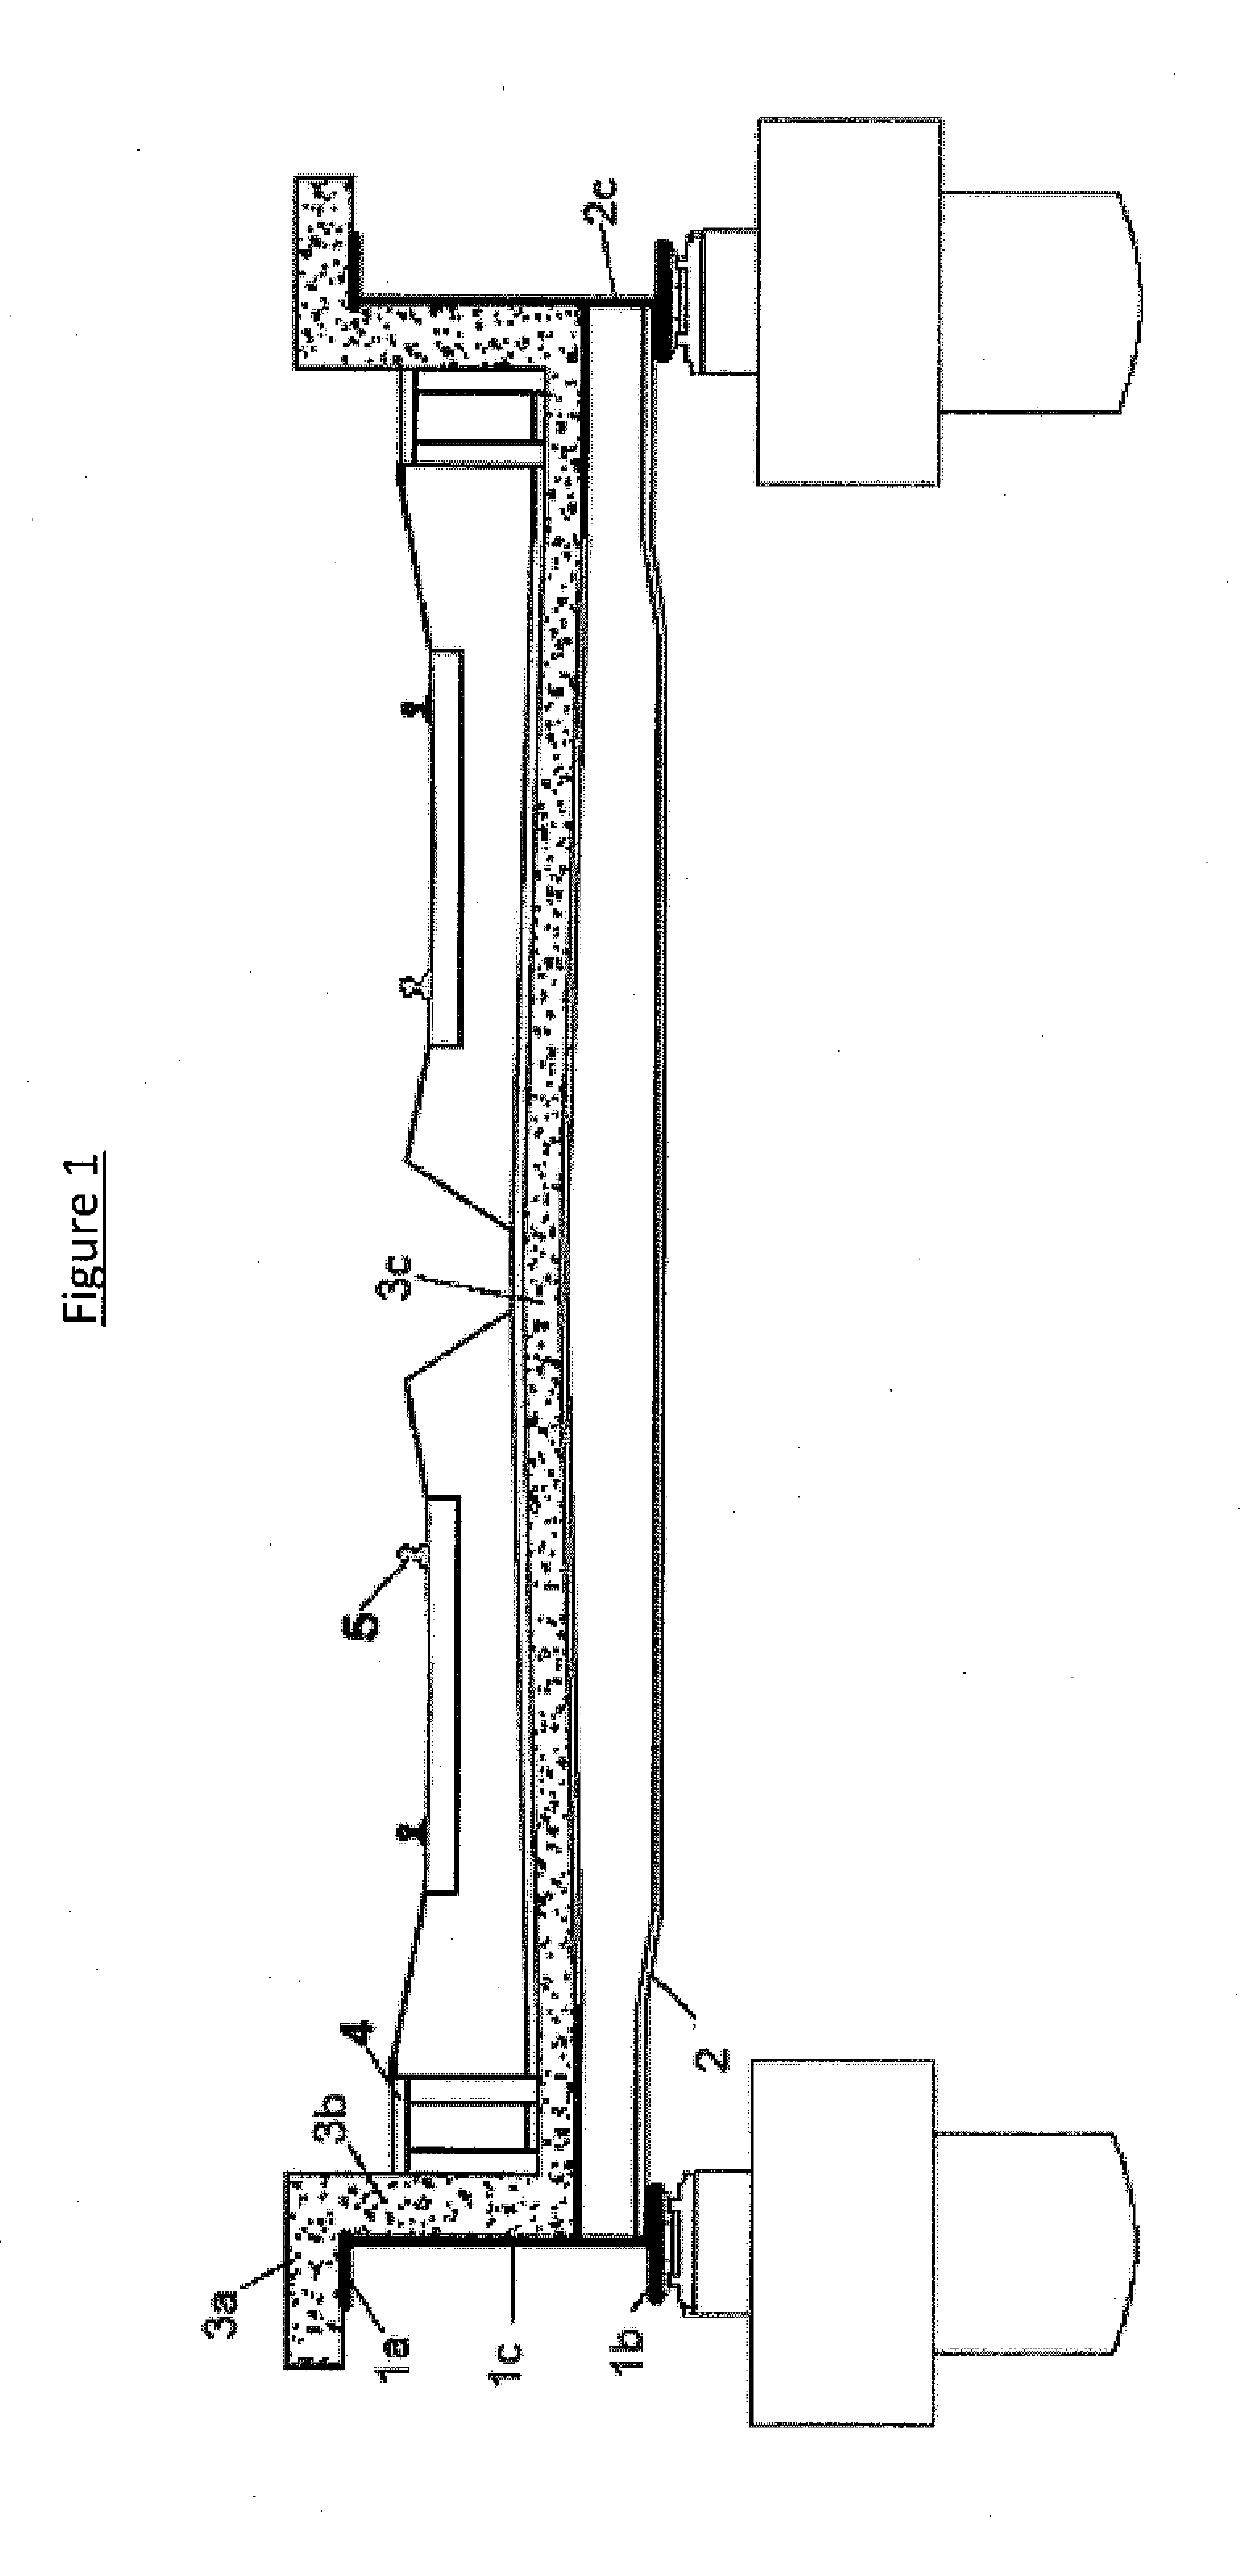 System for construction of composite u shaped reinforced girders bridge deck and methods thereof